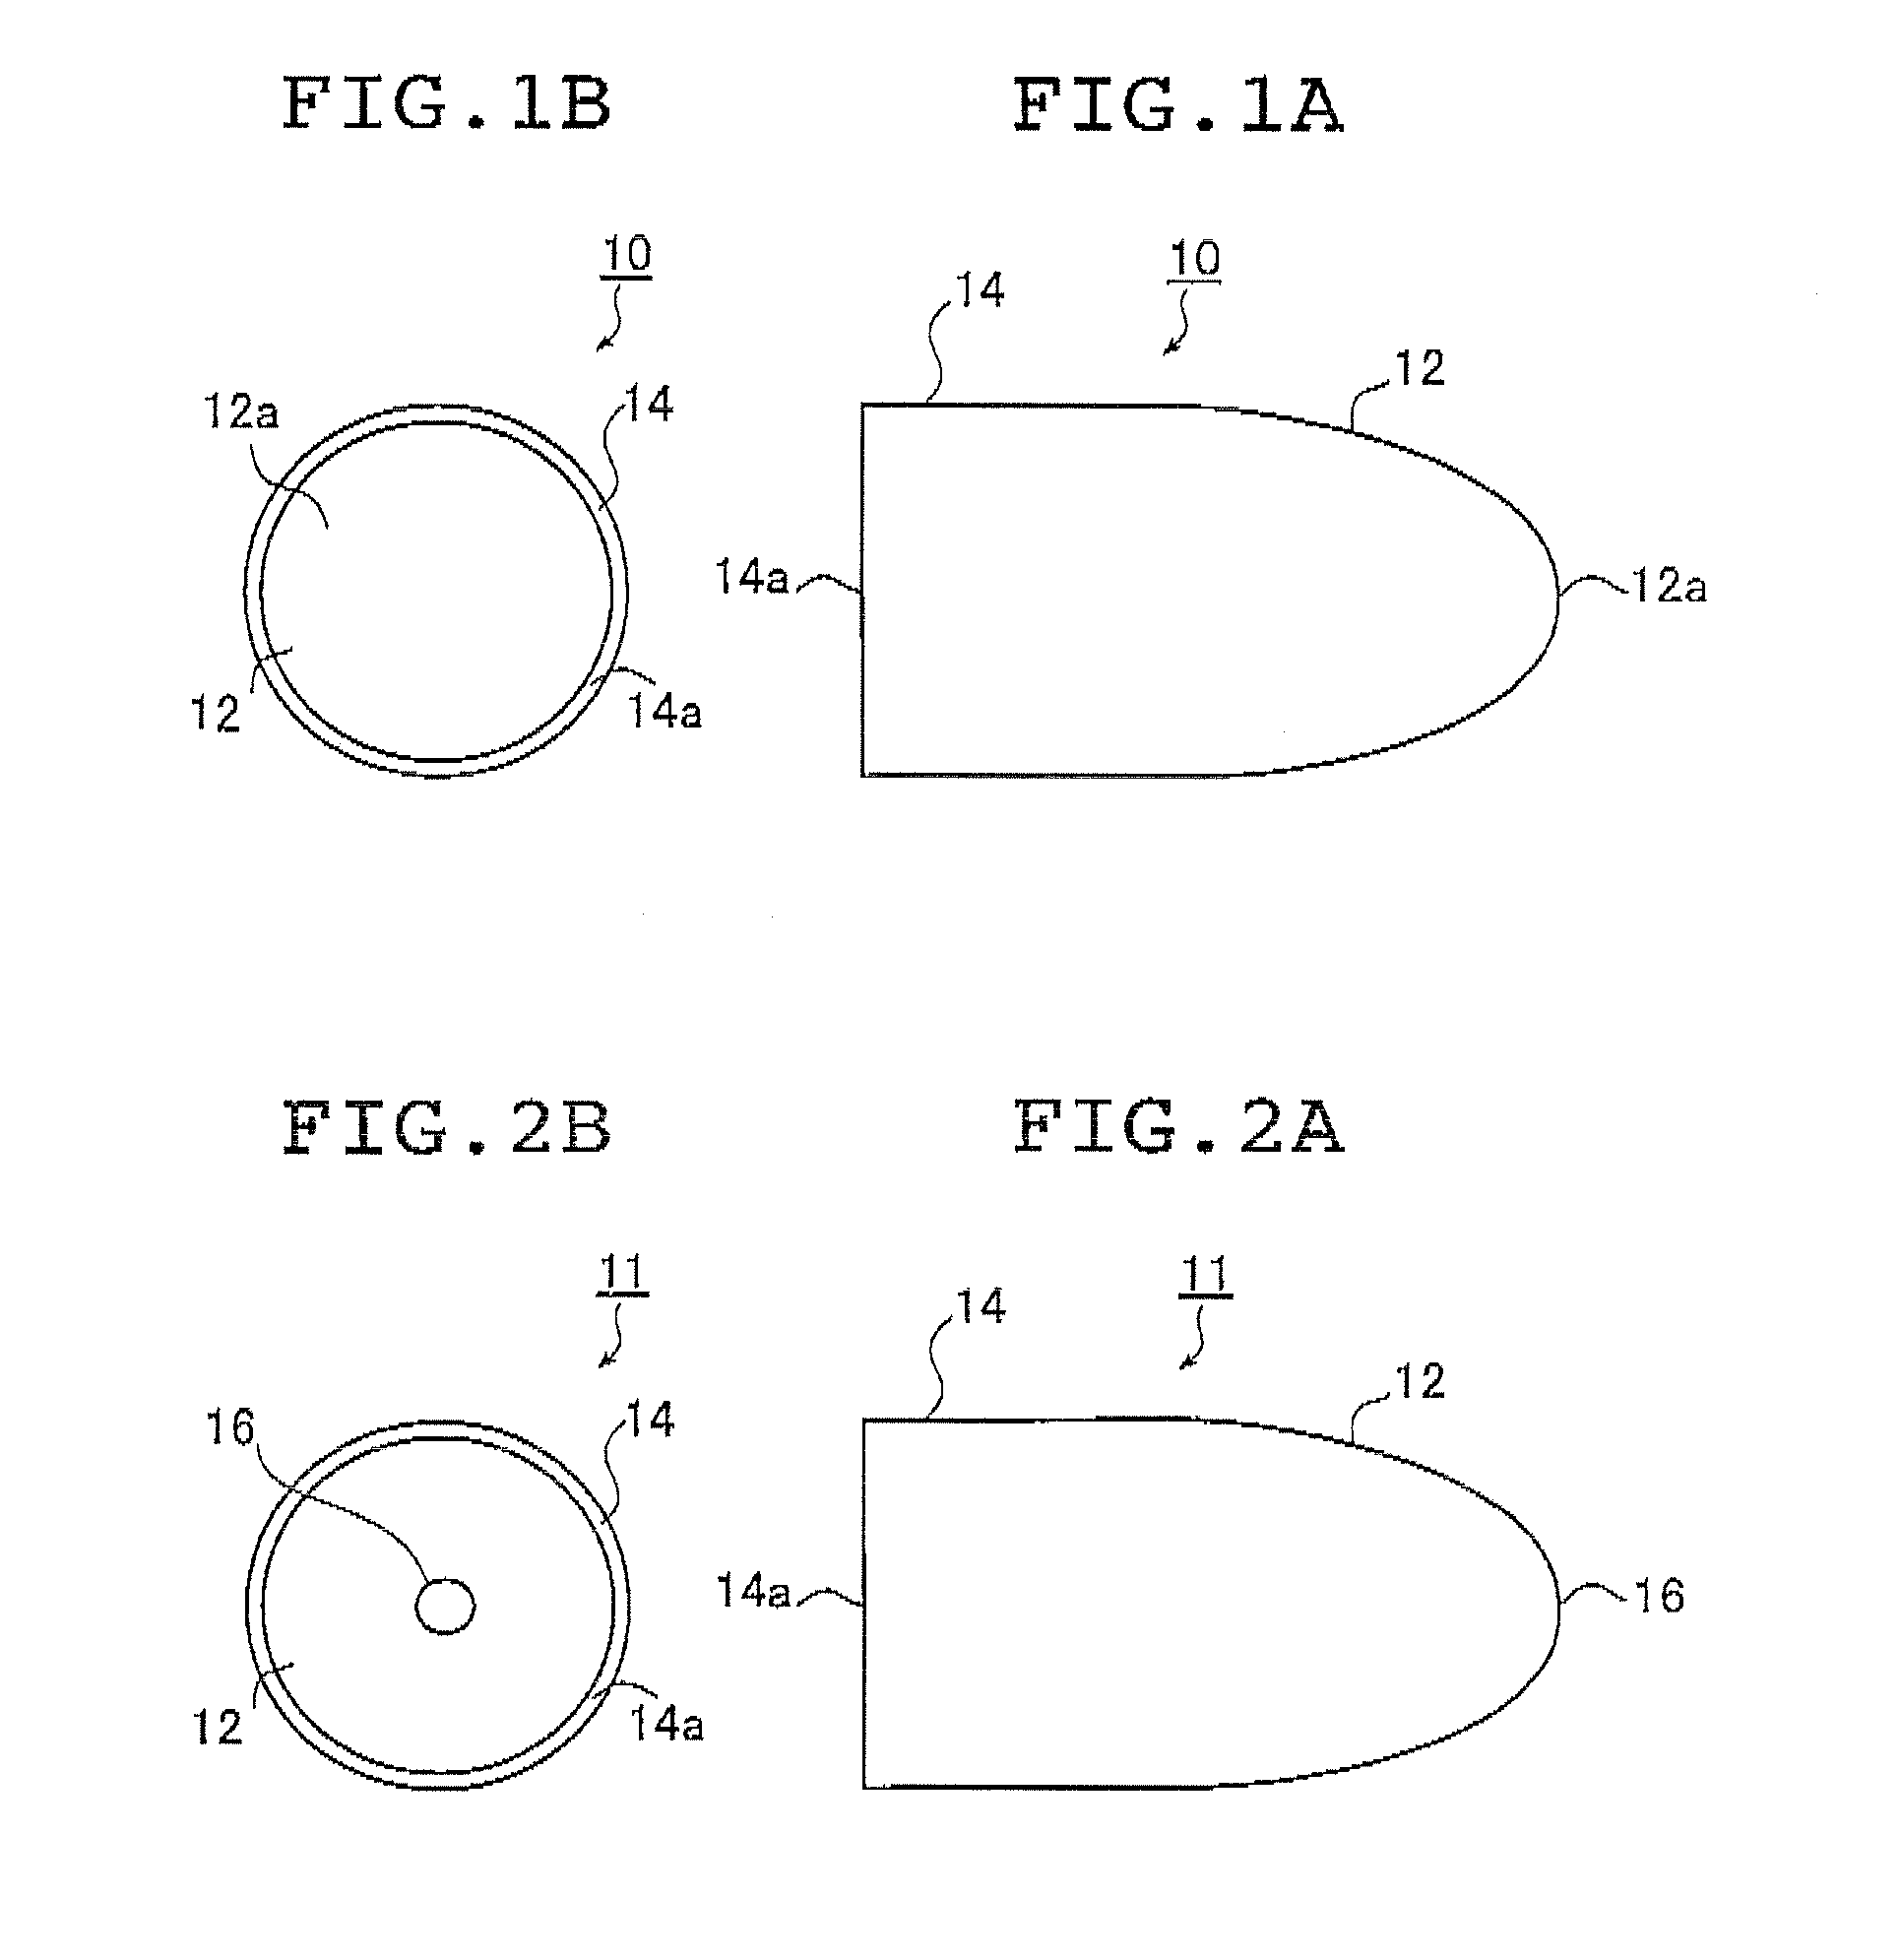 Insertion assisting device